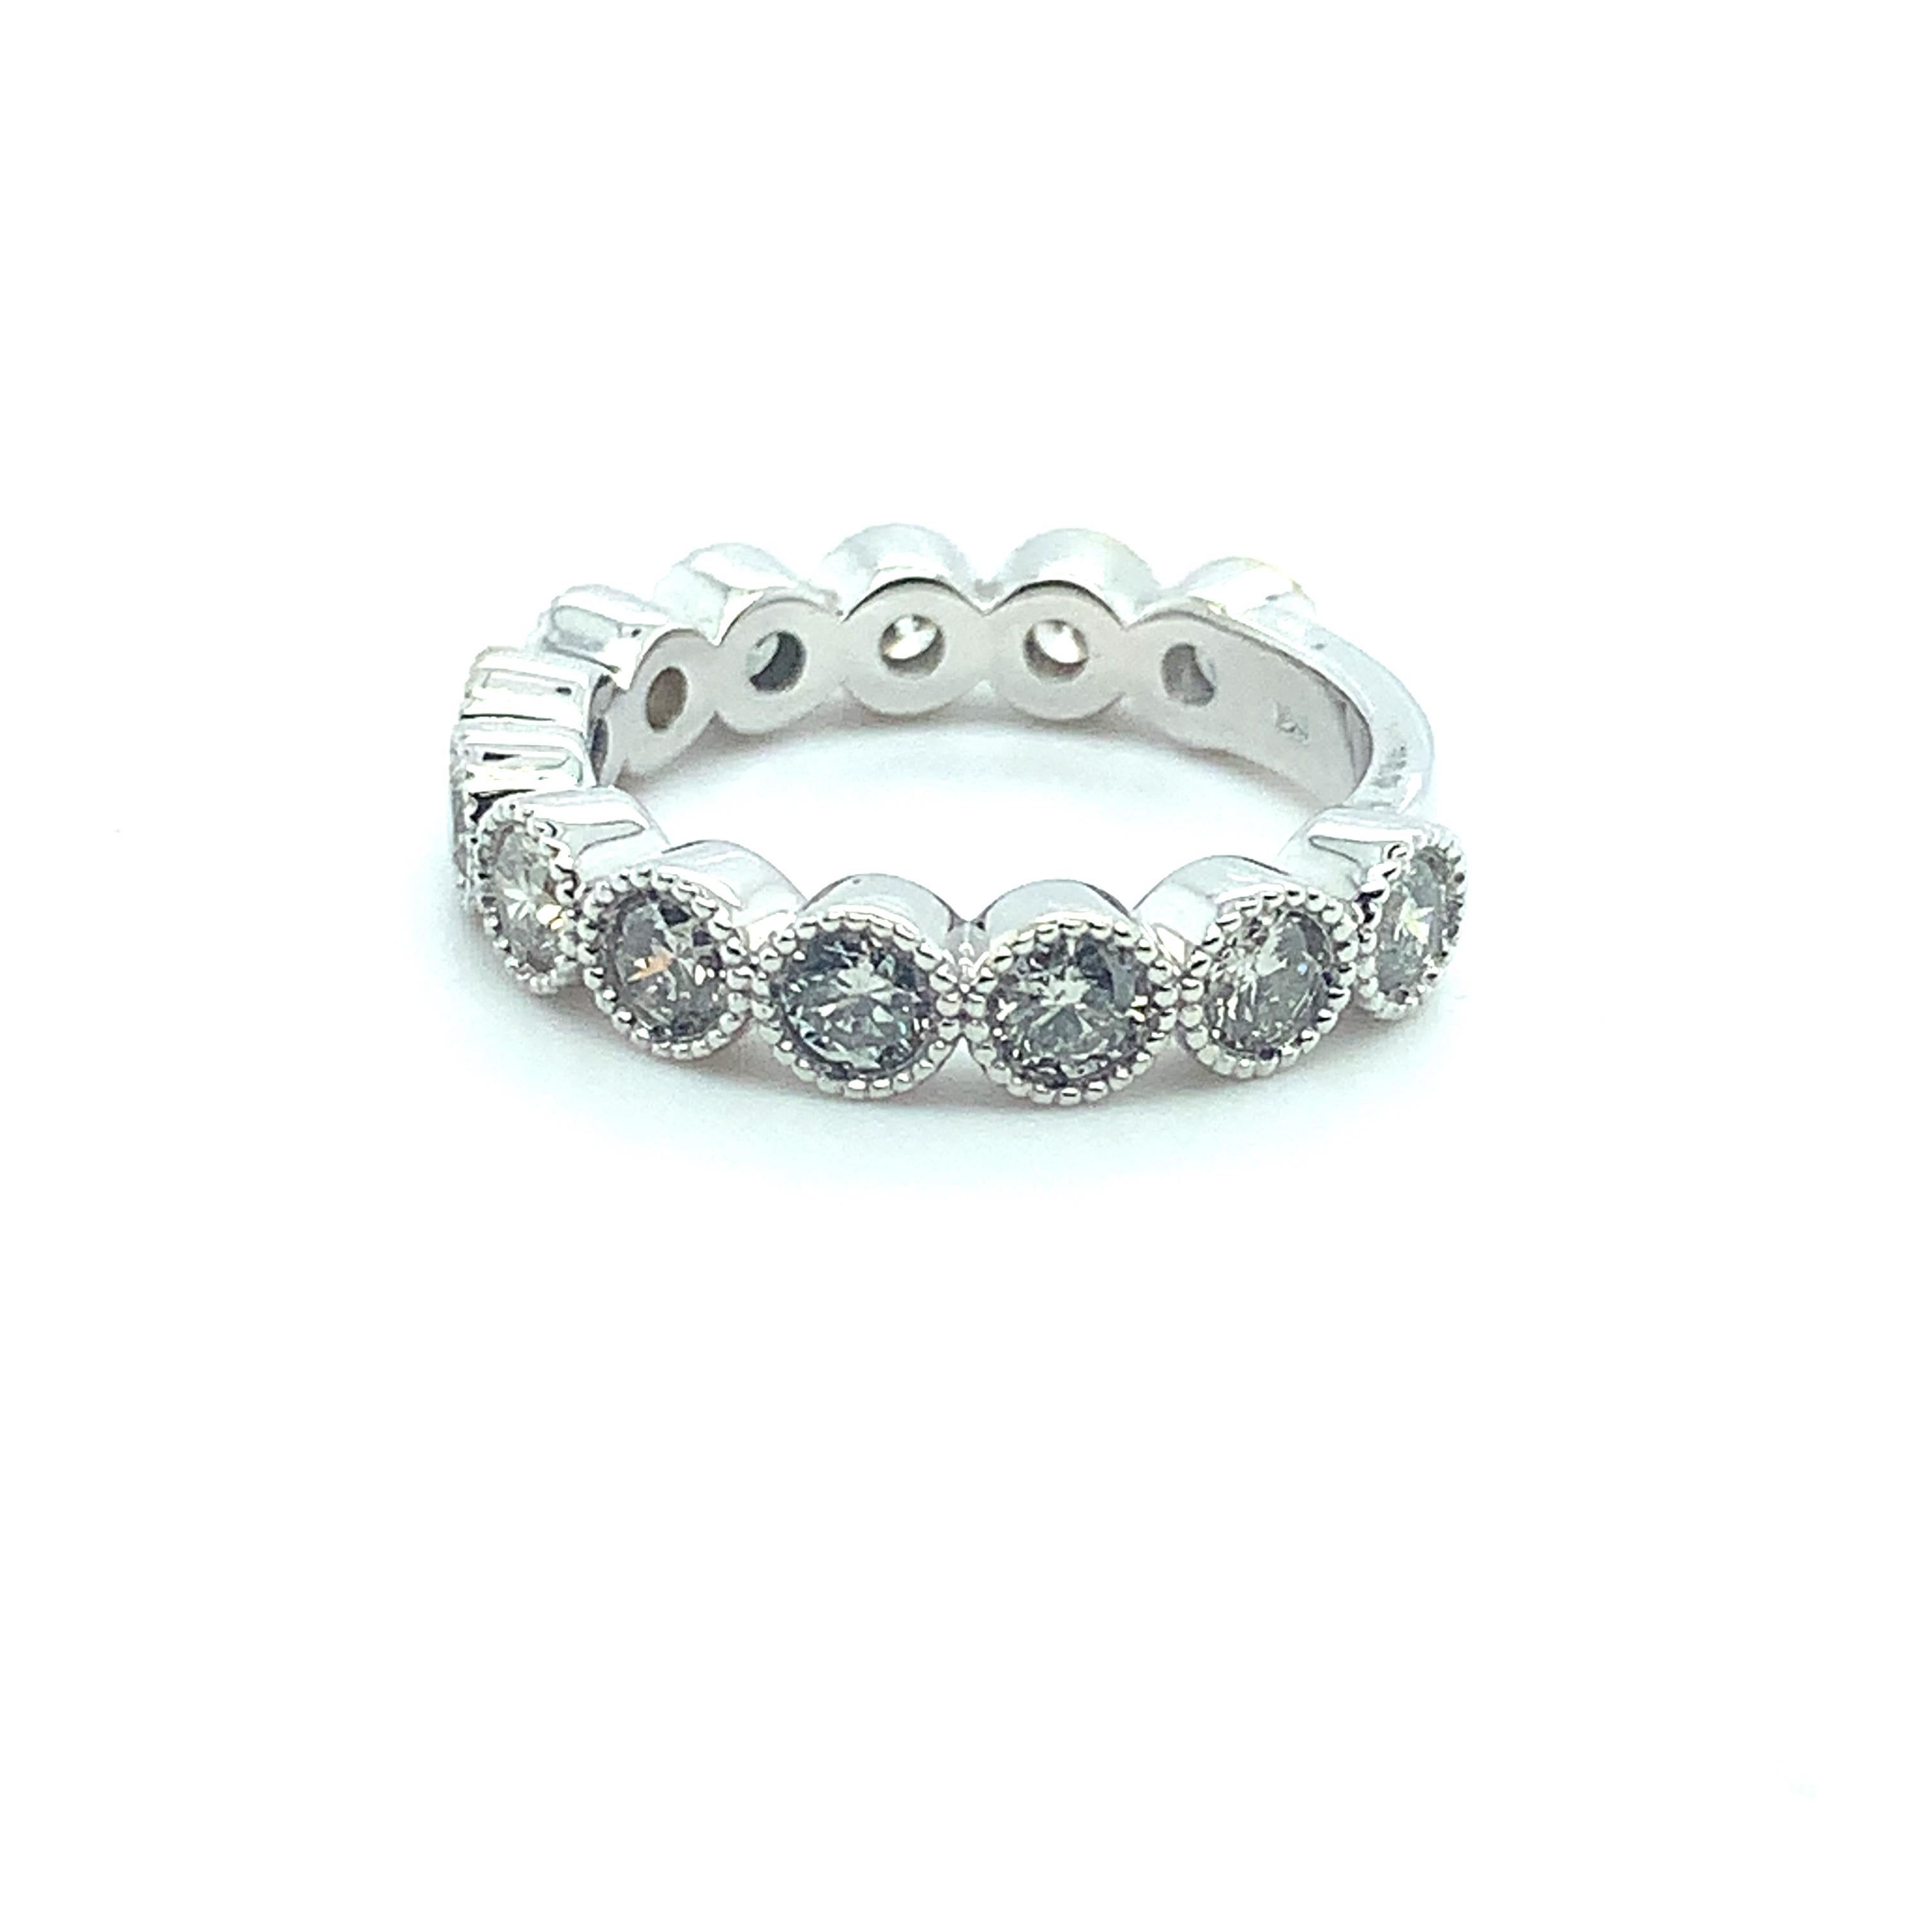 Stunning 14K white gold diamond wedding band featuring 13 round brilliant cut diamonds weighing 1.43 carats total. The diamonds are set in bezels with a milgrain edge. The diamonds go 3/4 around the ring, so it looks like an eternity band but does